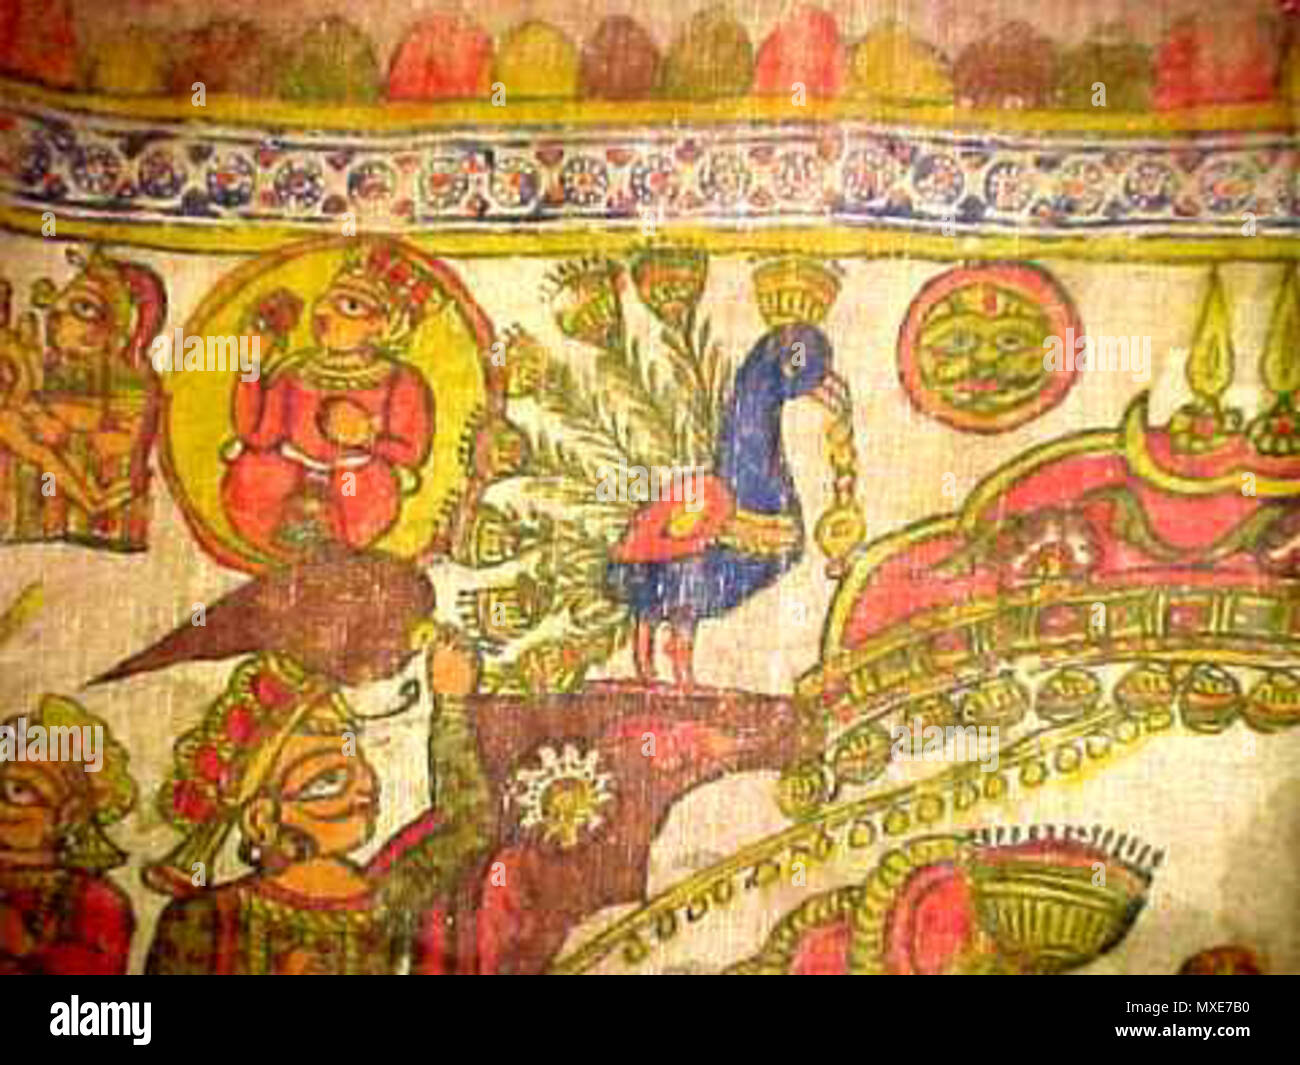 . English: A series of images of another par of Pabuji, this one from the early 19th century Source: ebay, April 2002 'This is an old (mid 1800s or earlier) Par. The painted textile is approximately 16 feet long and 55 1/2 inches wide. The story painting has been used to relay the story many times through the years and shows normal wear, especially on the bottom edge. There are some old repairs. The textile is made of two narrow pieces ( 26 3/4') sewen together. It appears to be an old linen-type material.' . early 19th century. Unknown 462 Pabuji2i Stock Photo